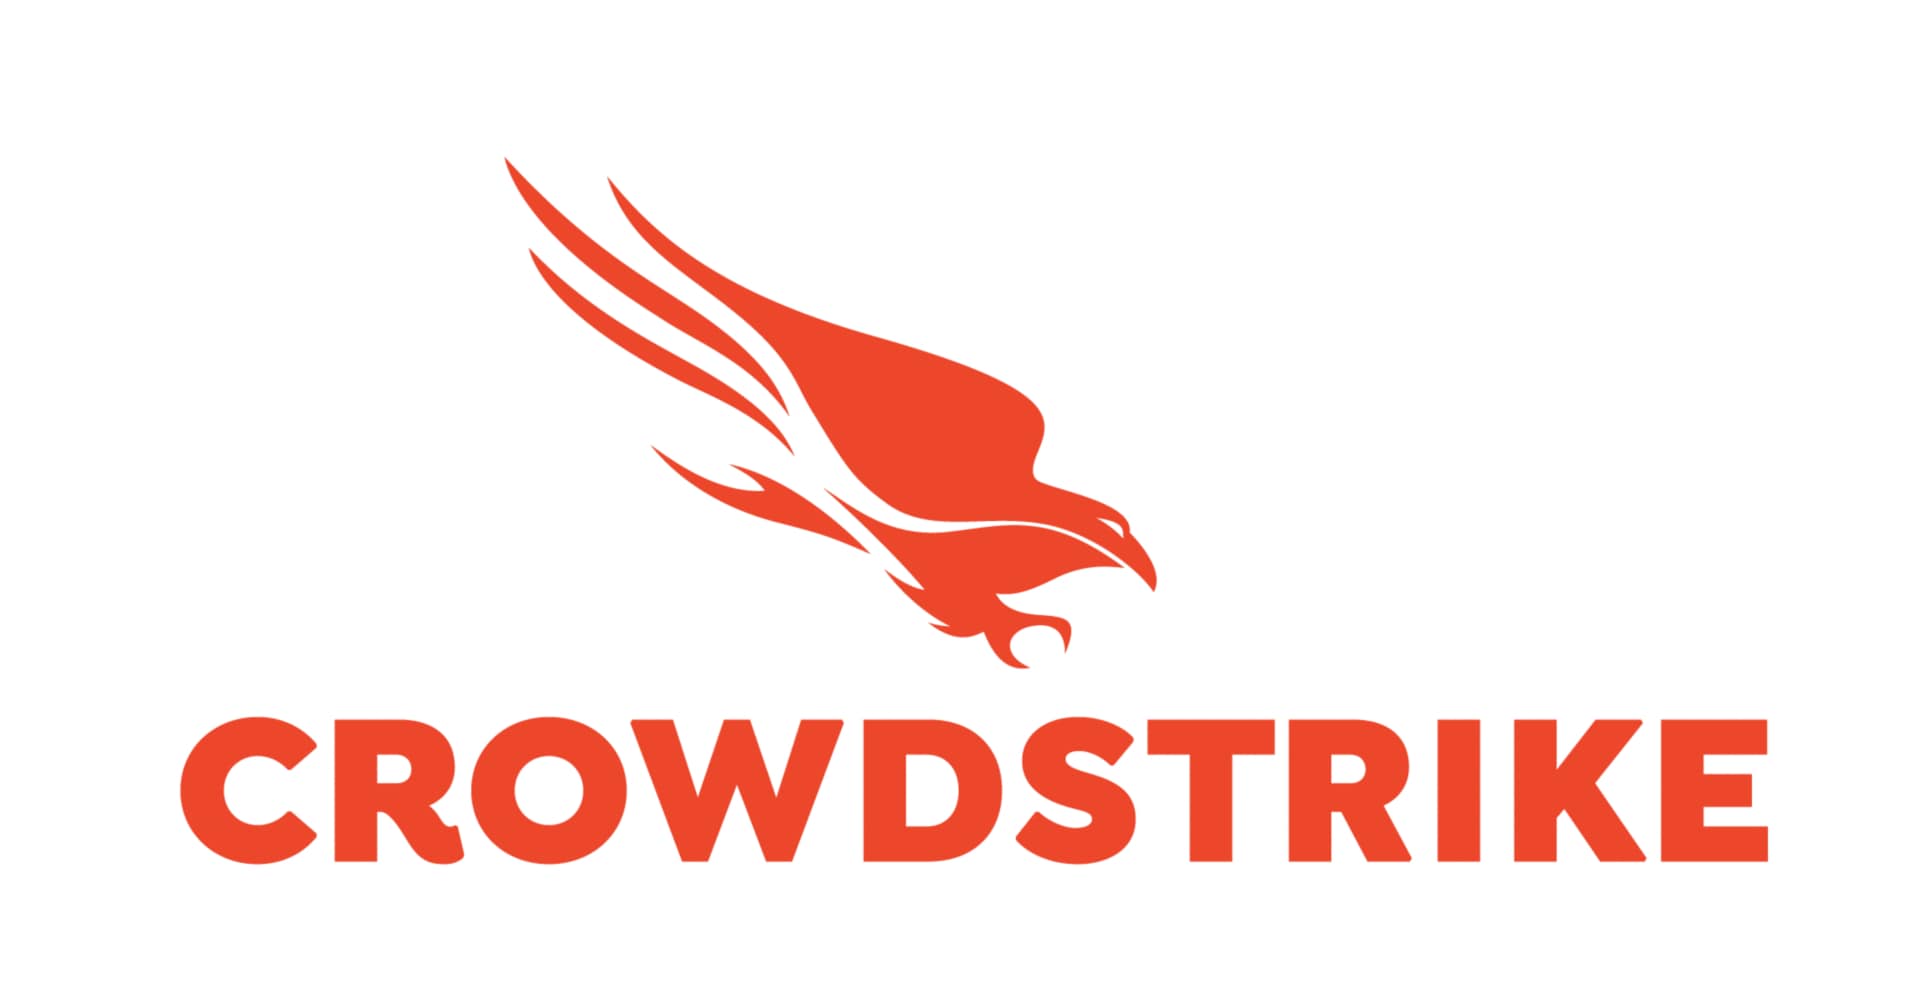 CrowdStrike 12-Month Falcon Device Control Software Subscription (500-749 Licenses)